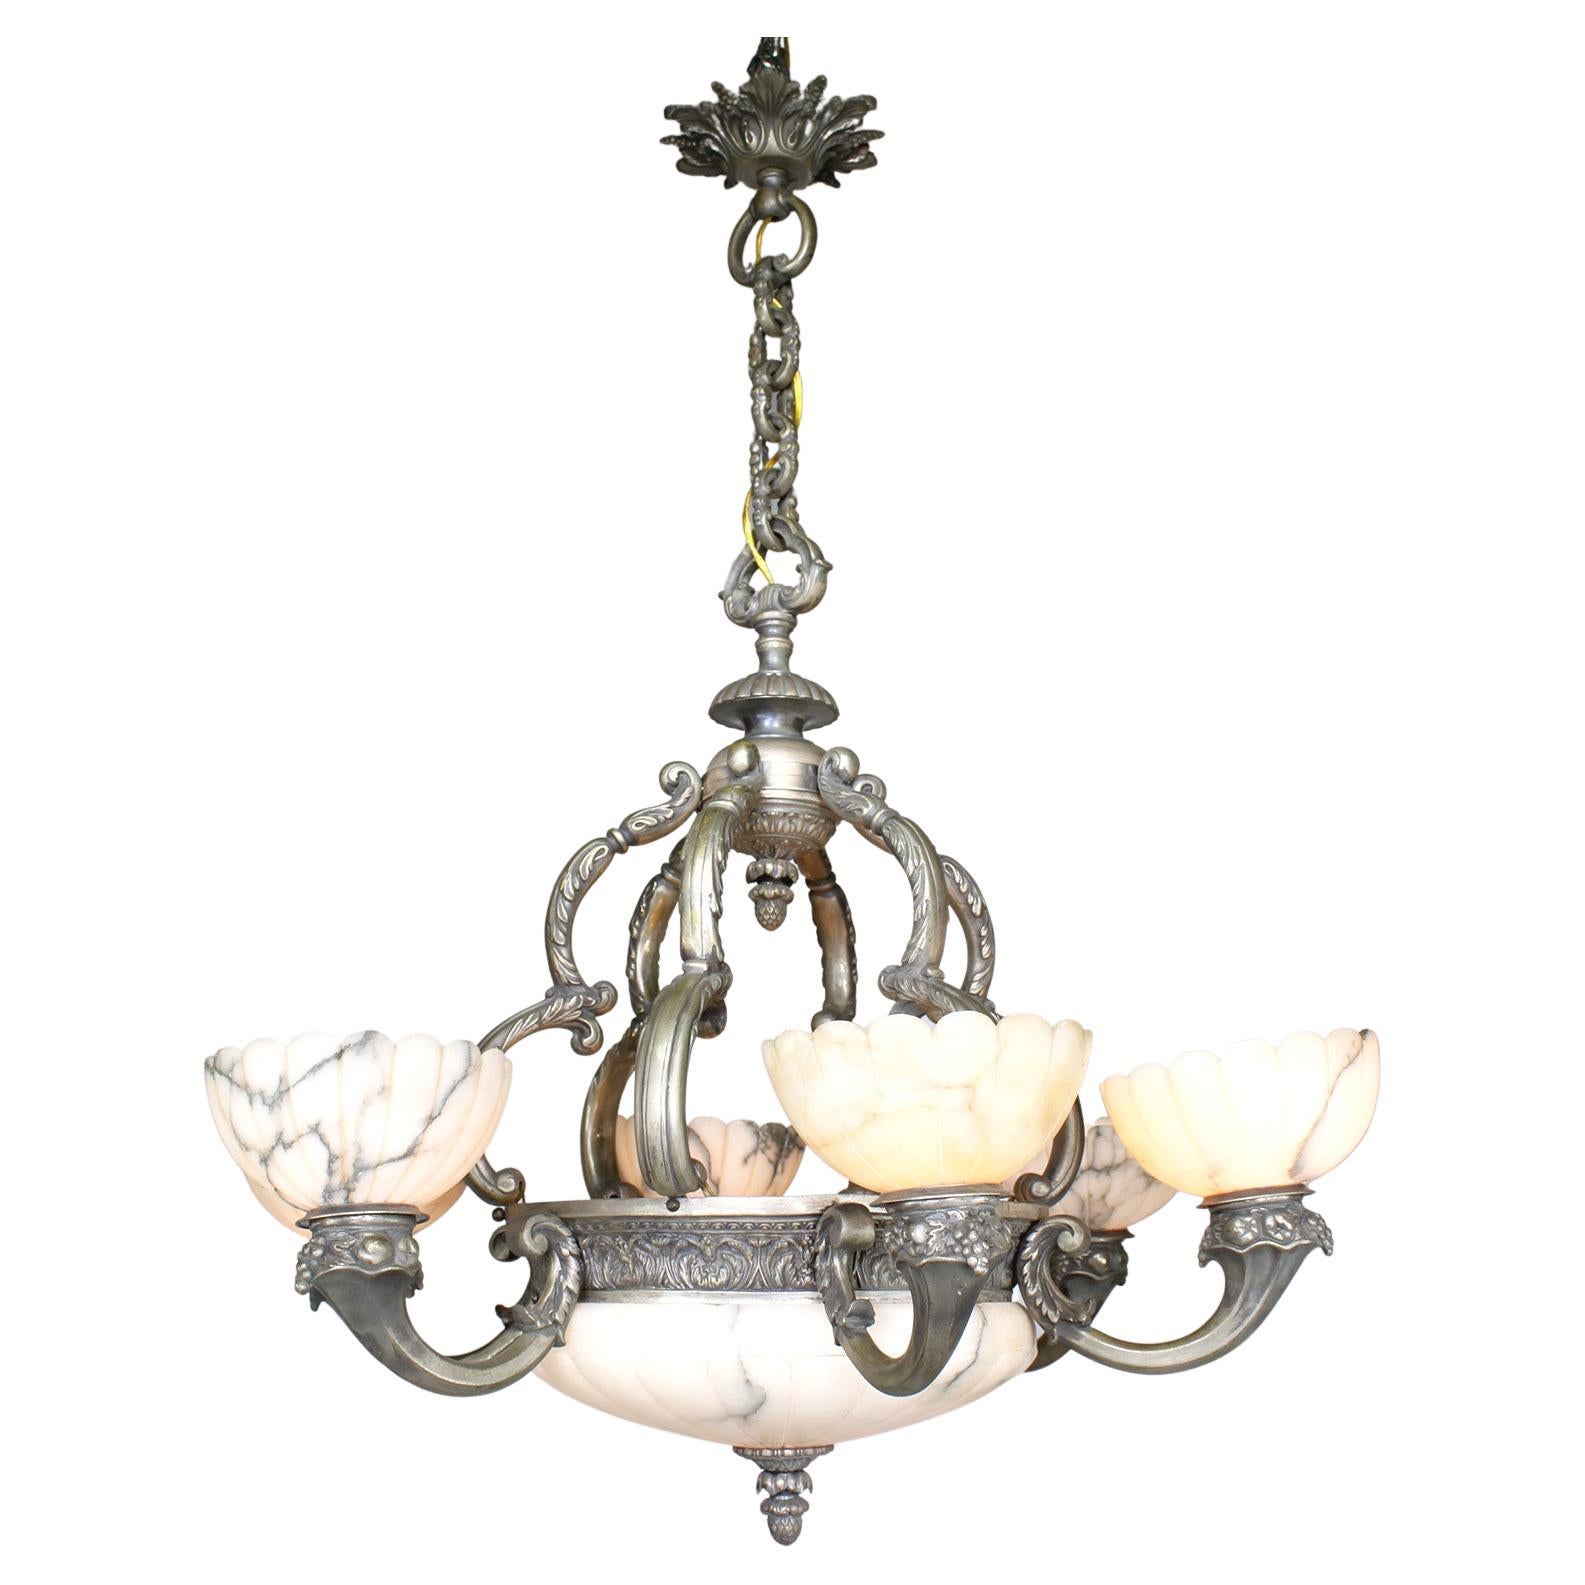 French Early 20th C. Art-Deco Silvered Bronze & Alabaster 6-Light Chandelier For Sale